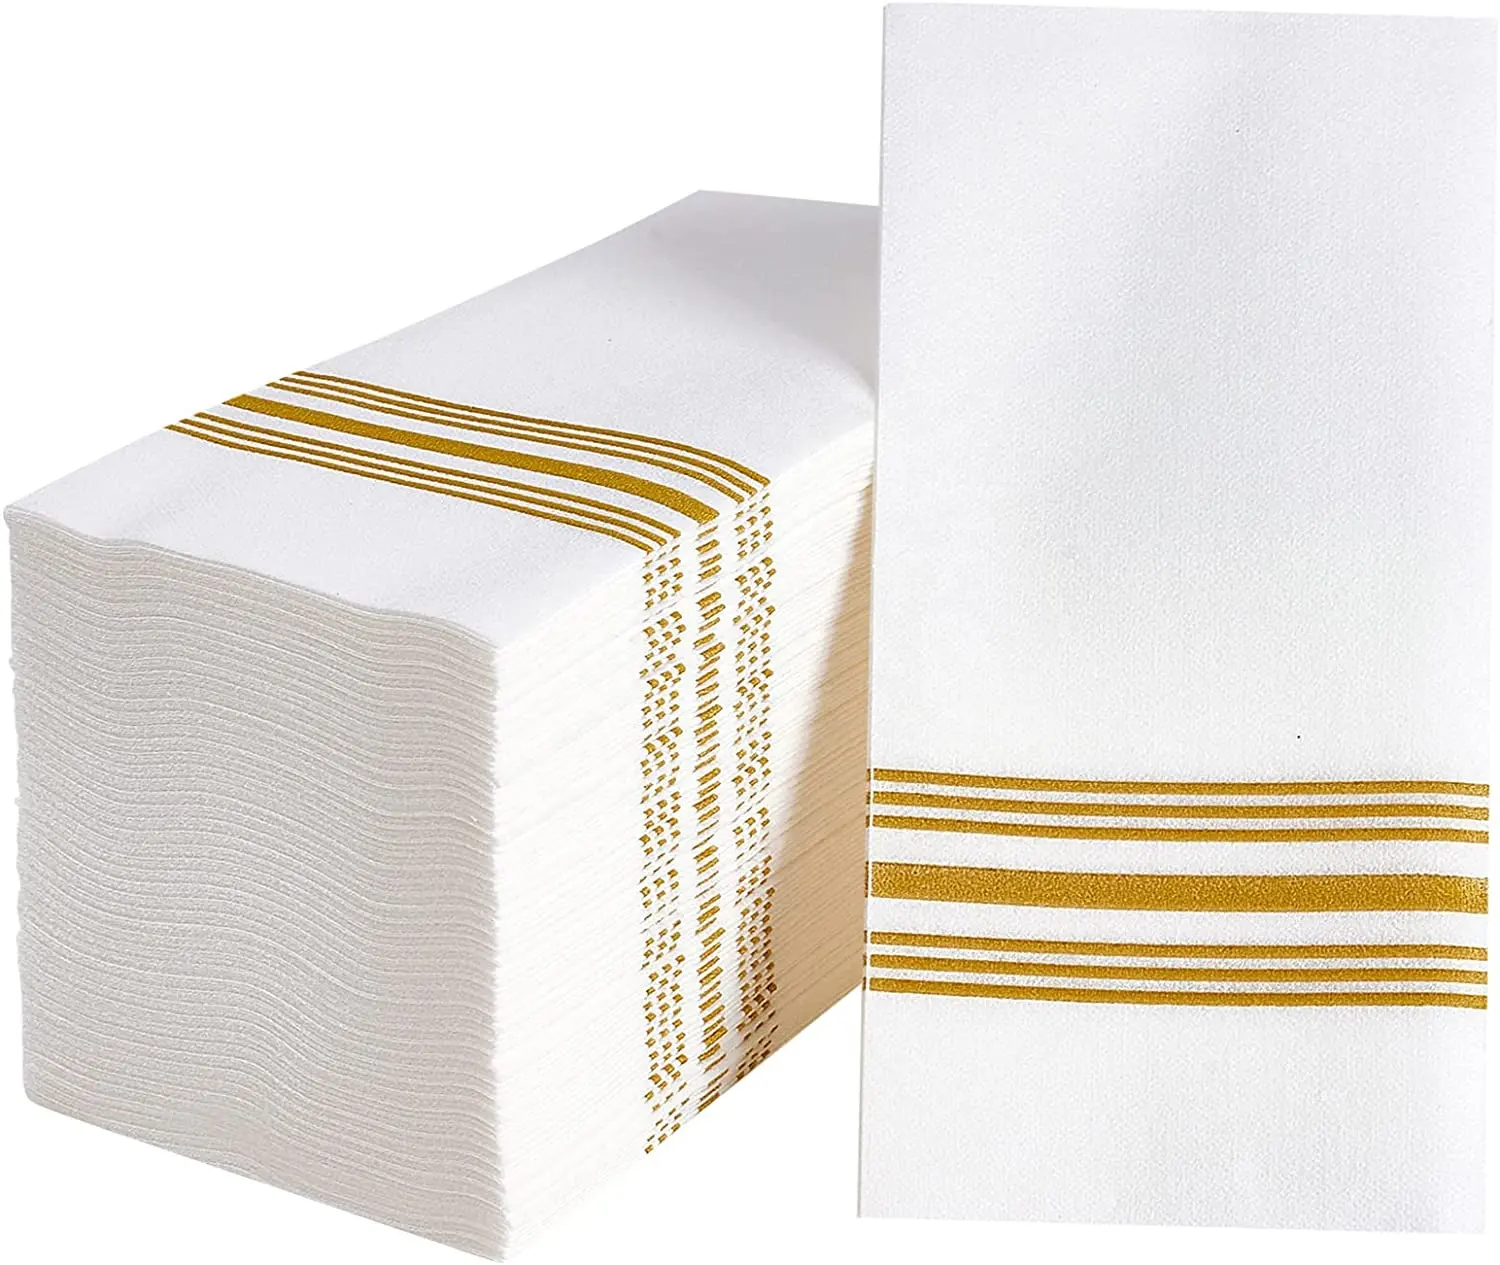 Napkins Guest Towels 30PCS Disposable Hand Towel Paper Napkins Decorative for Everyday Dinner Anniversary party